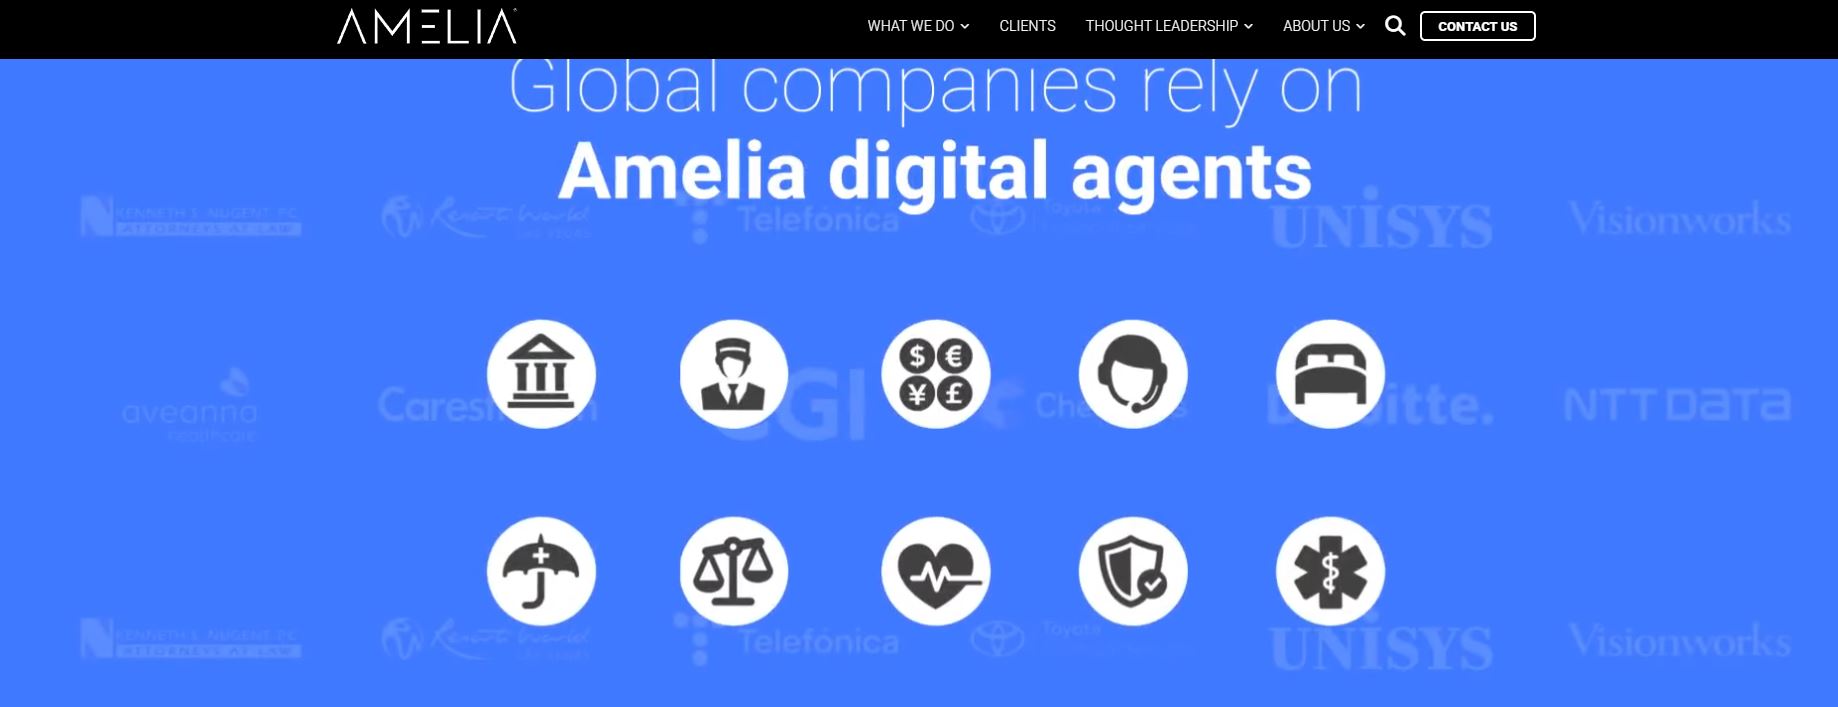 Amelia is revolutionizing the way humans interact. Also, with a staggering $175 million in funding